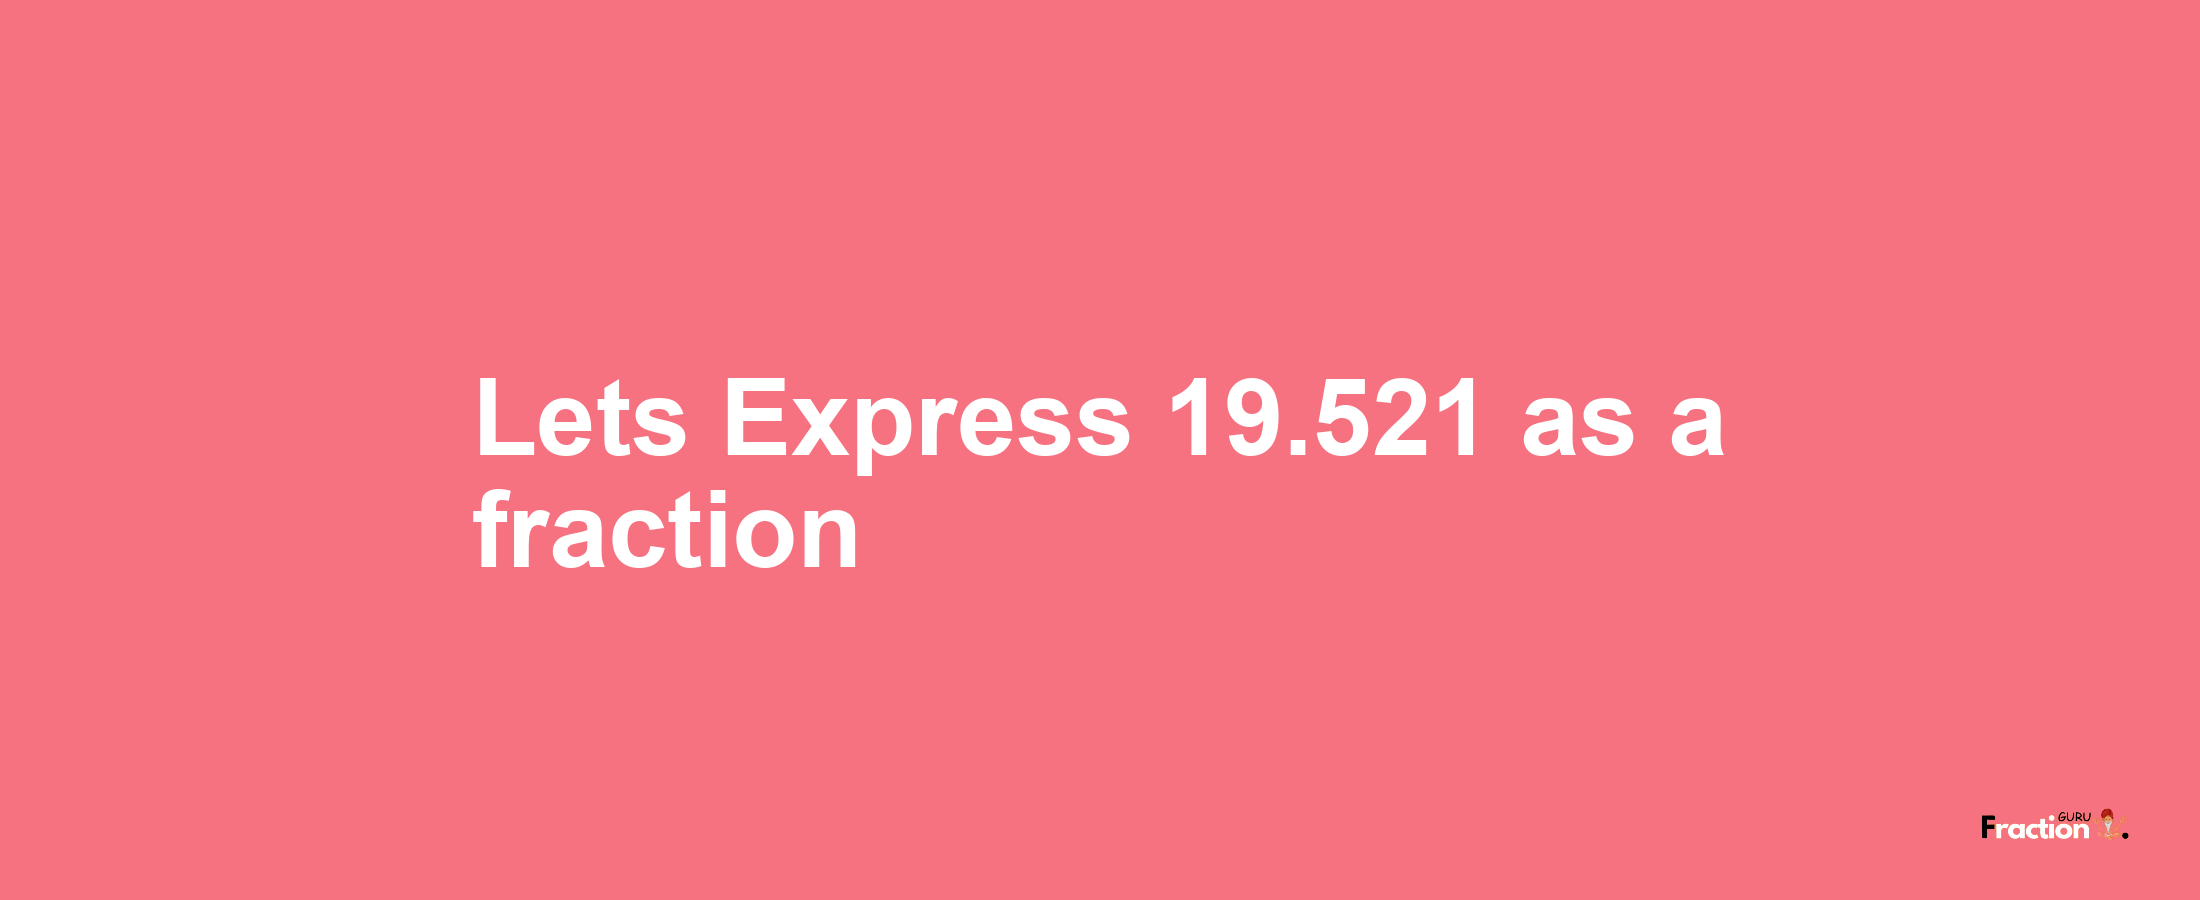 Lets Express 19.521 as afraction